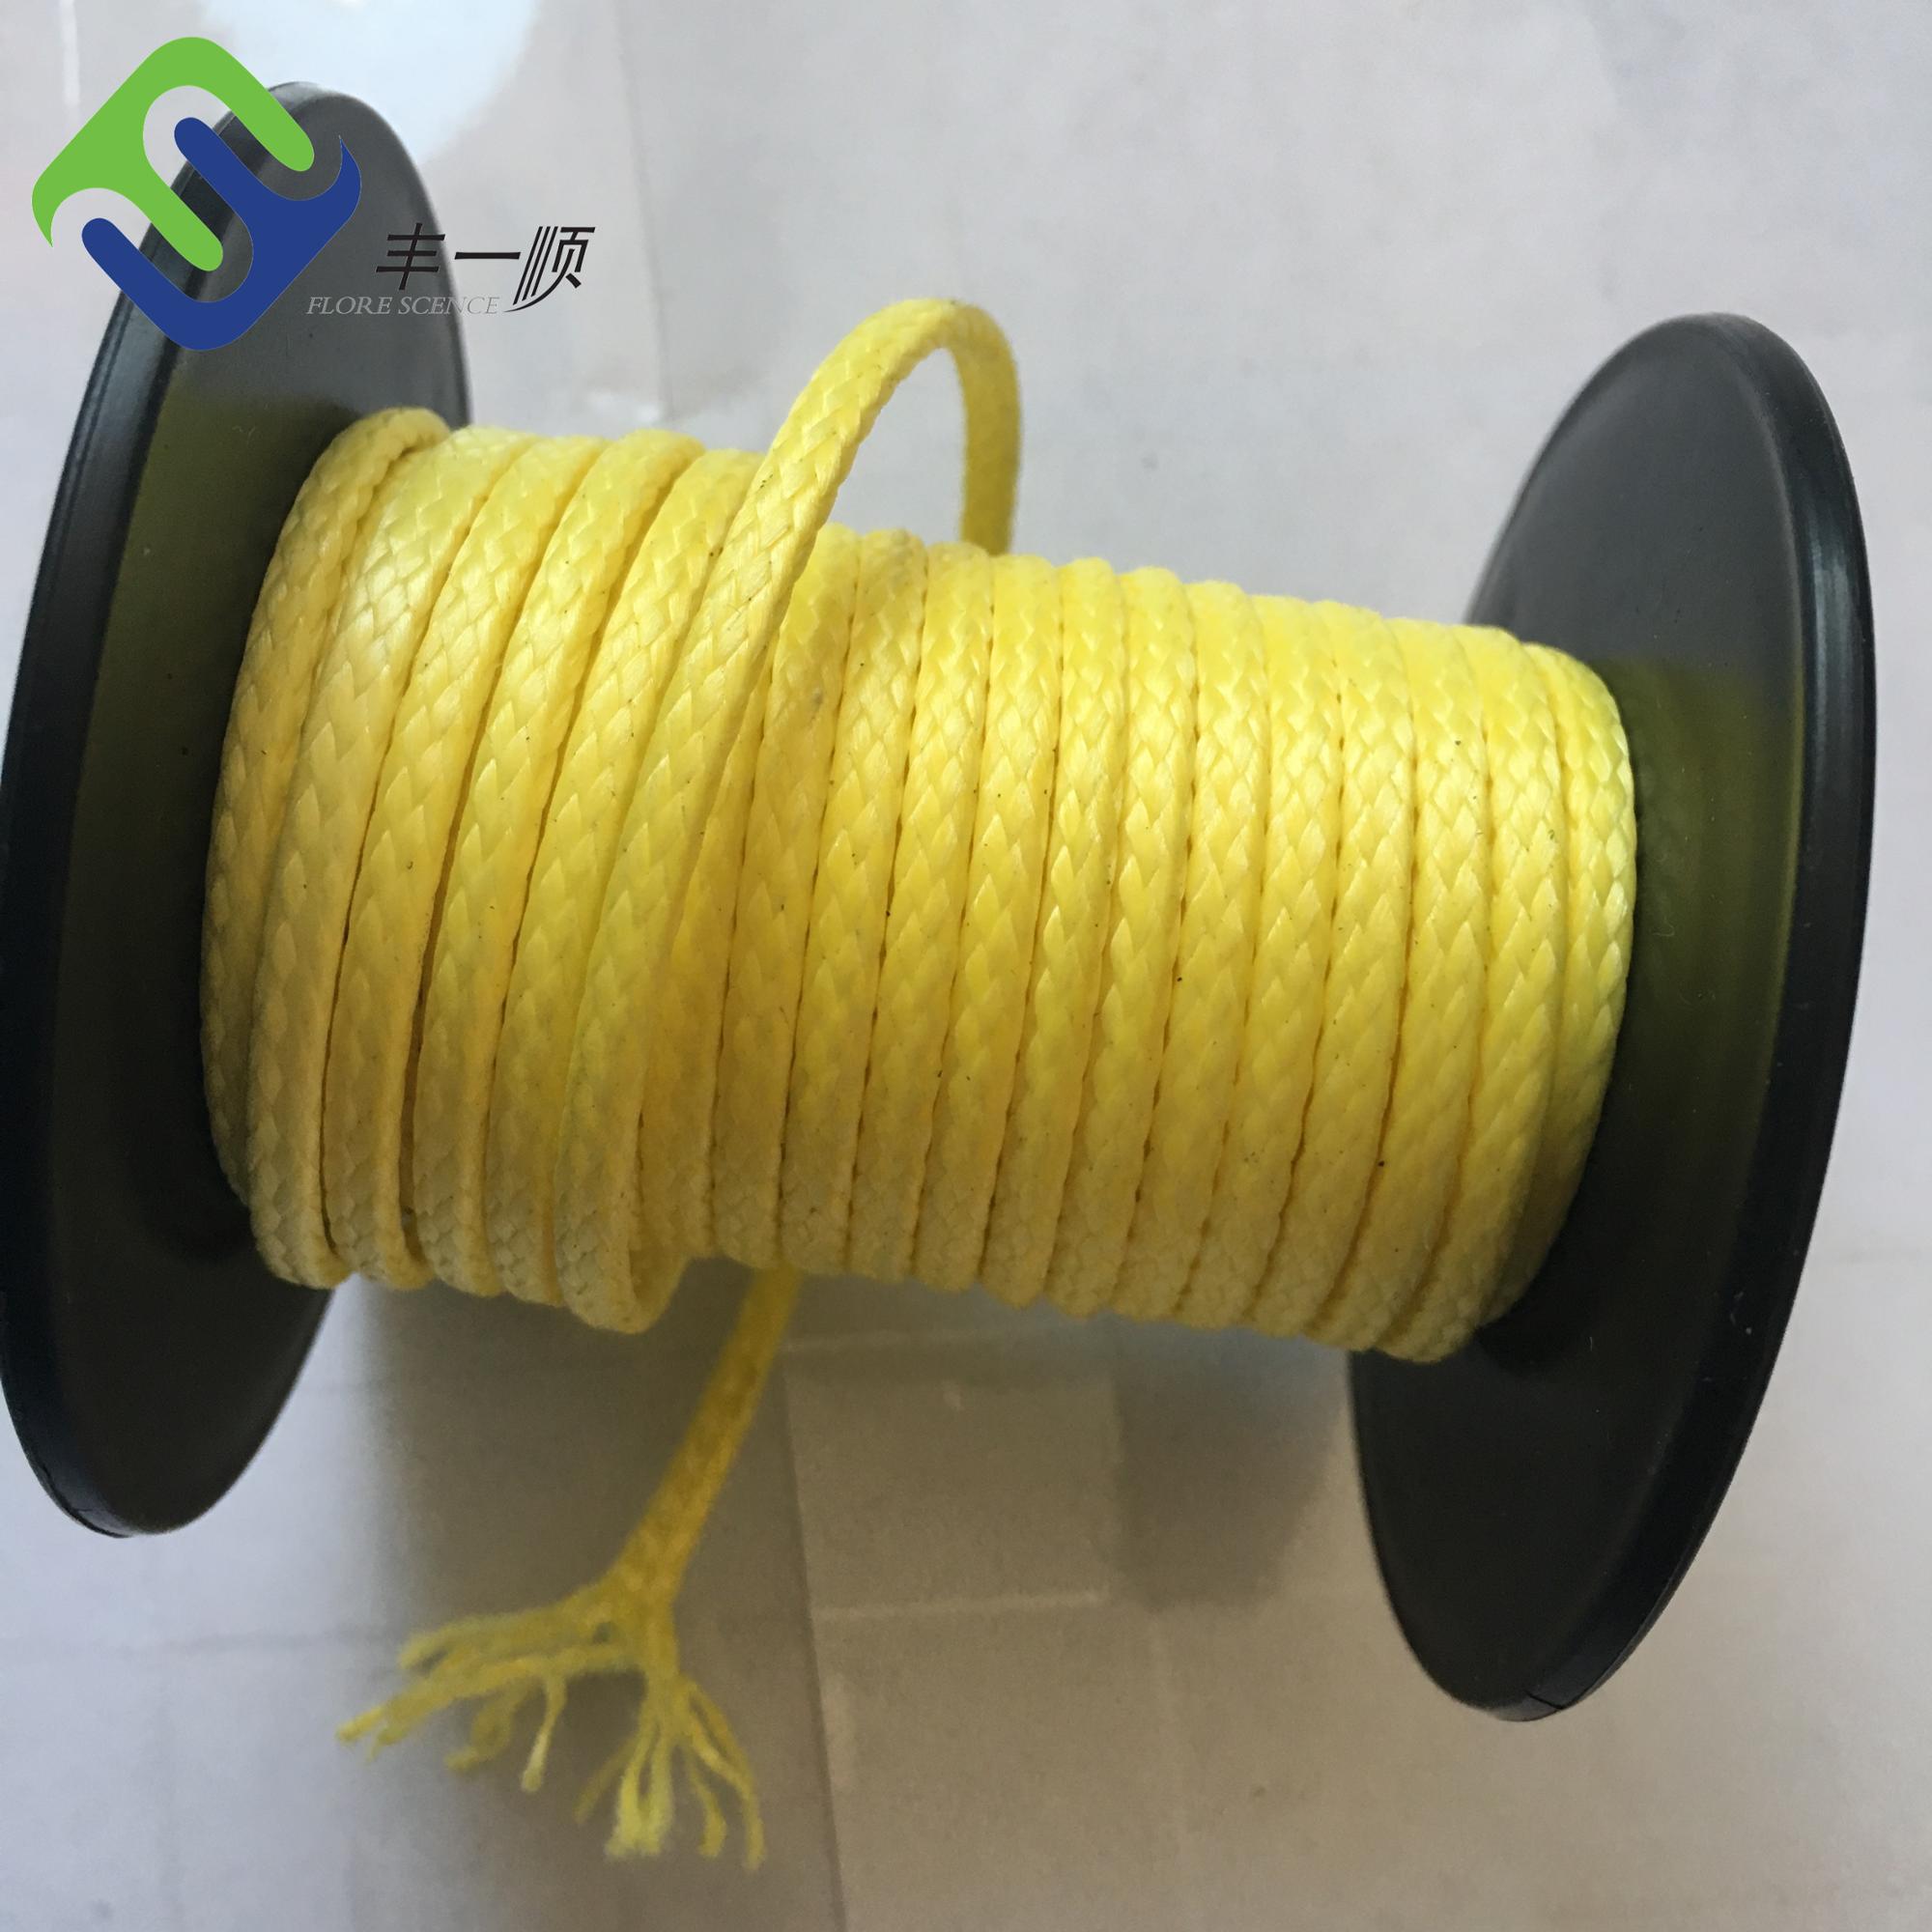 China Gold Supplier for 12 Strands Uhmwpe(Hmpe) Rope - Synthetic 2mm 3mm 12 Strand Braided UHMWPE Paraglider Winch Rope – Florescence